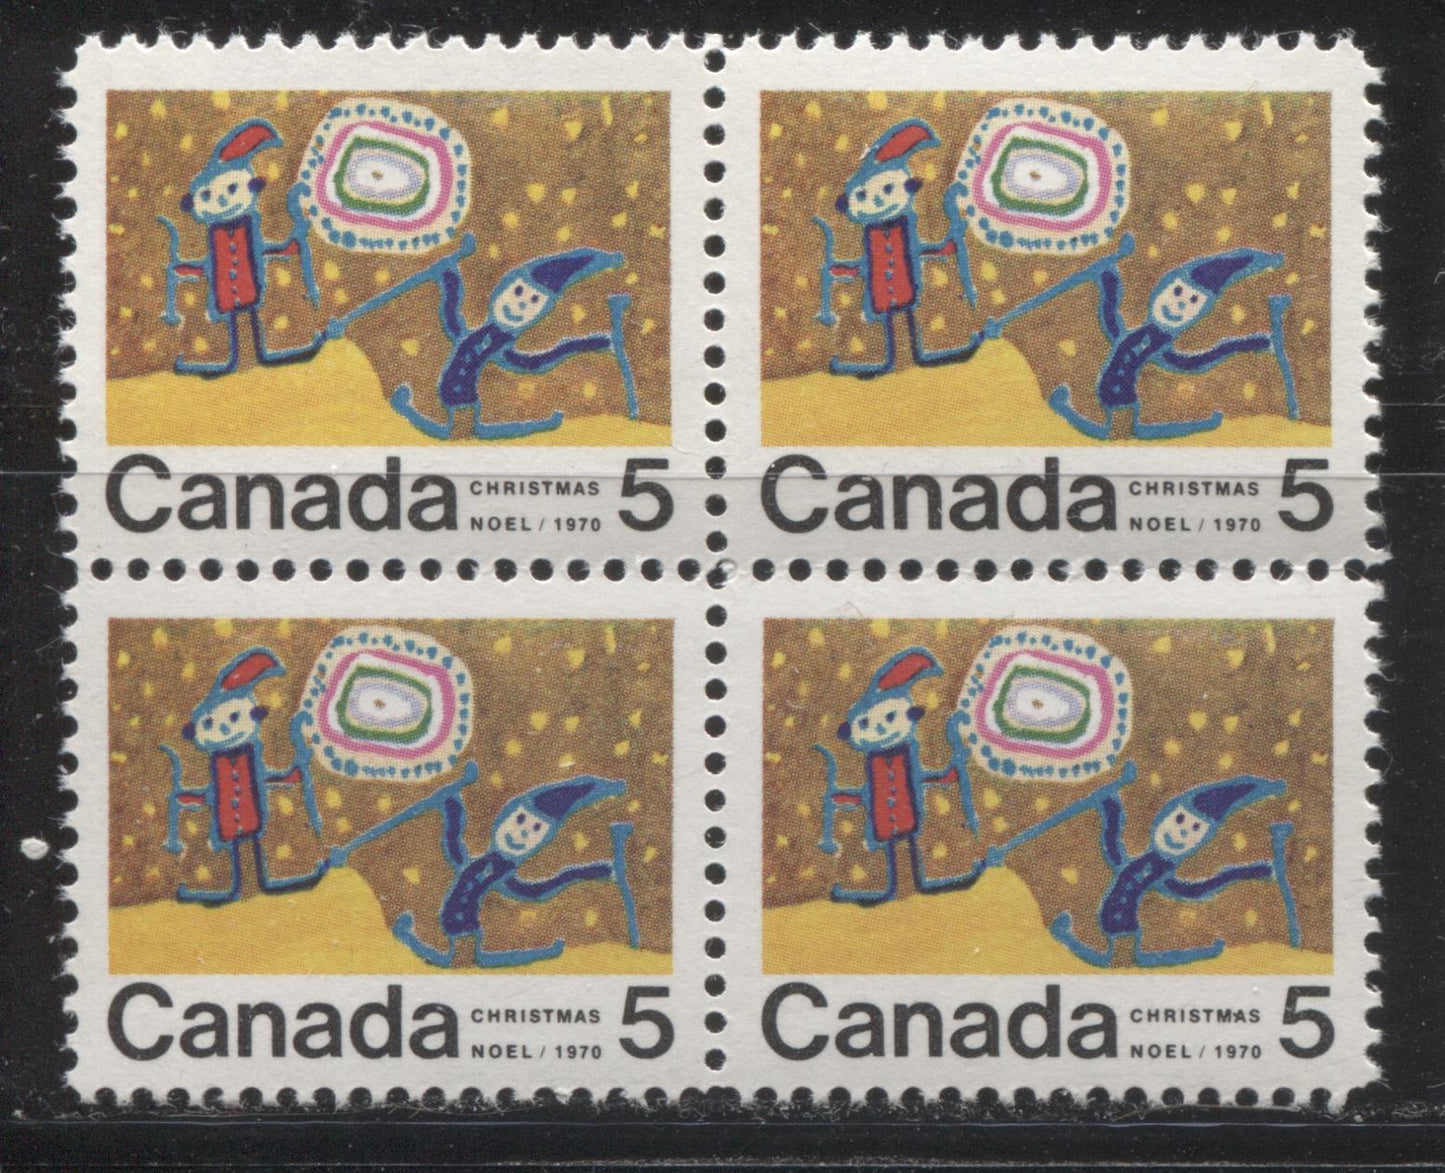 Lot 112 Canada #522i 5c Multicoloured Children Skiing, 1970 Christmas Issue, a VFNH Centre Block of 4 on HB11 Smooth Paper, With Dot Between "MA" of "Christmas" on LR Stamp, Perf. 11.9